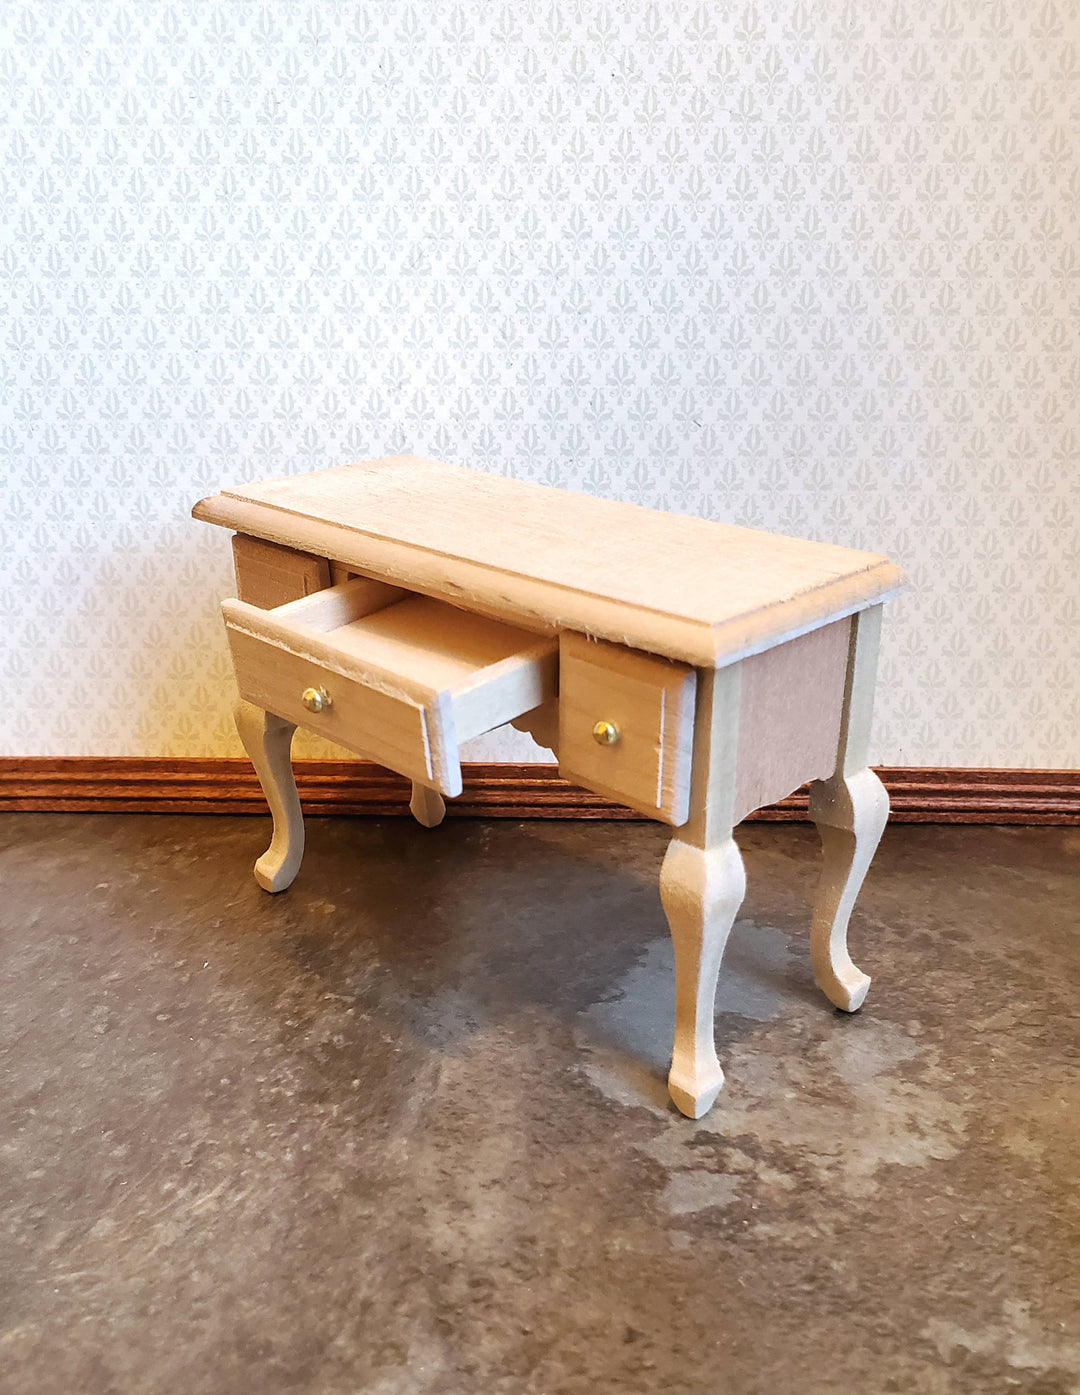 Dollhouse Miniature Writing Desk or Vanity Table Unpainted Wood 1:12 Scale